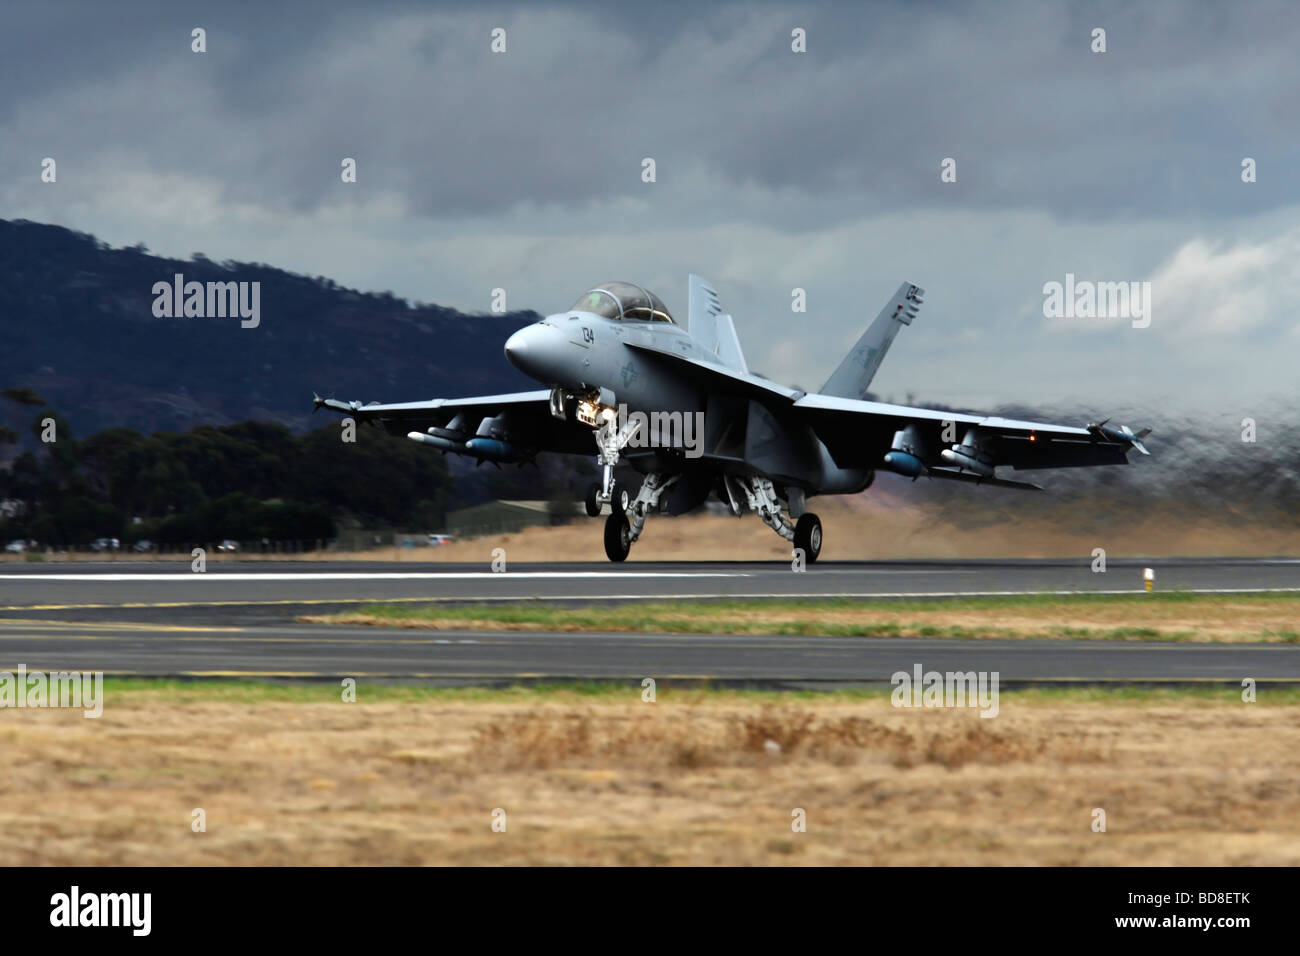 F A 18 Super Hornet Jet Fighter Taking Off Stock Photo